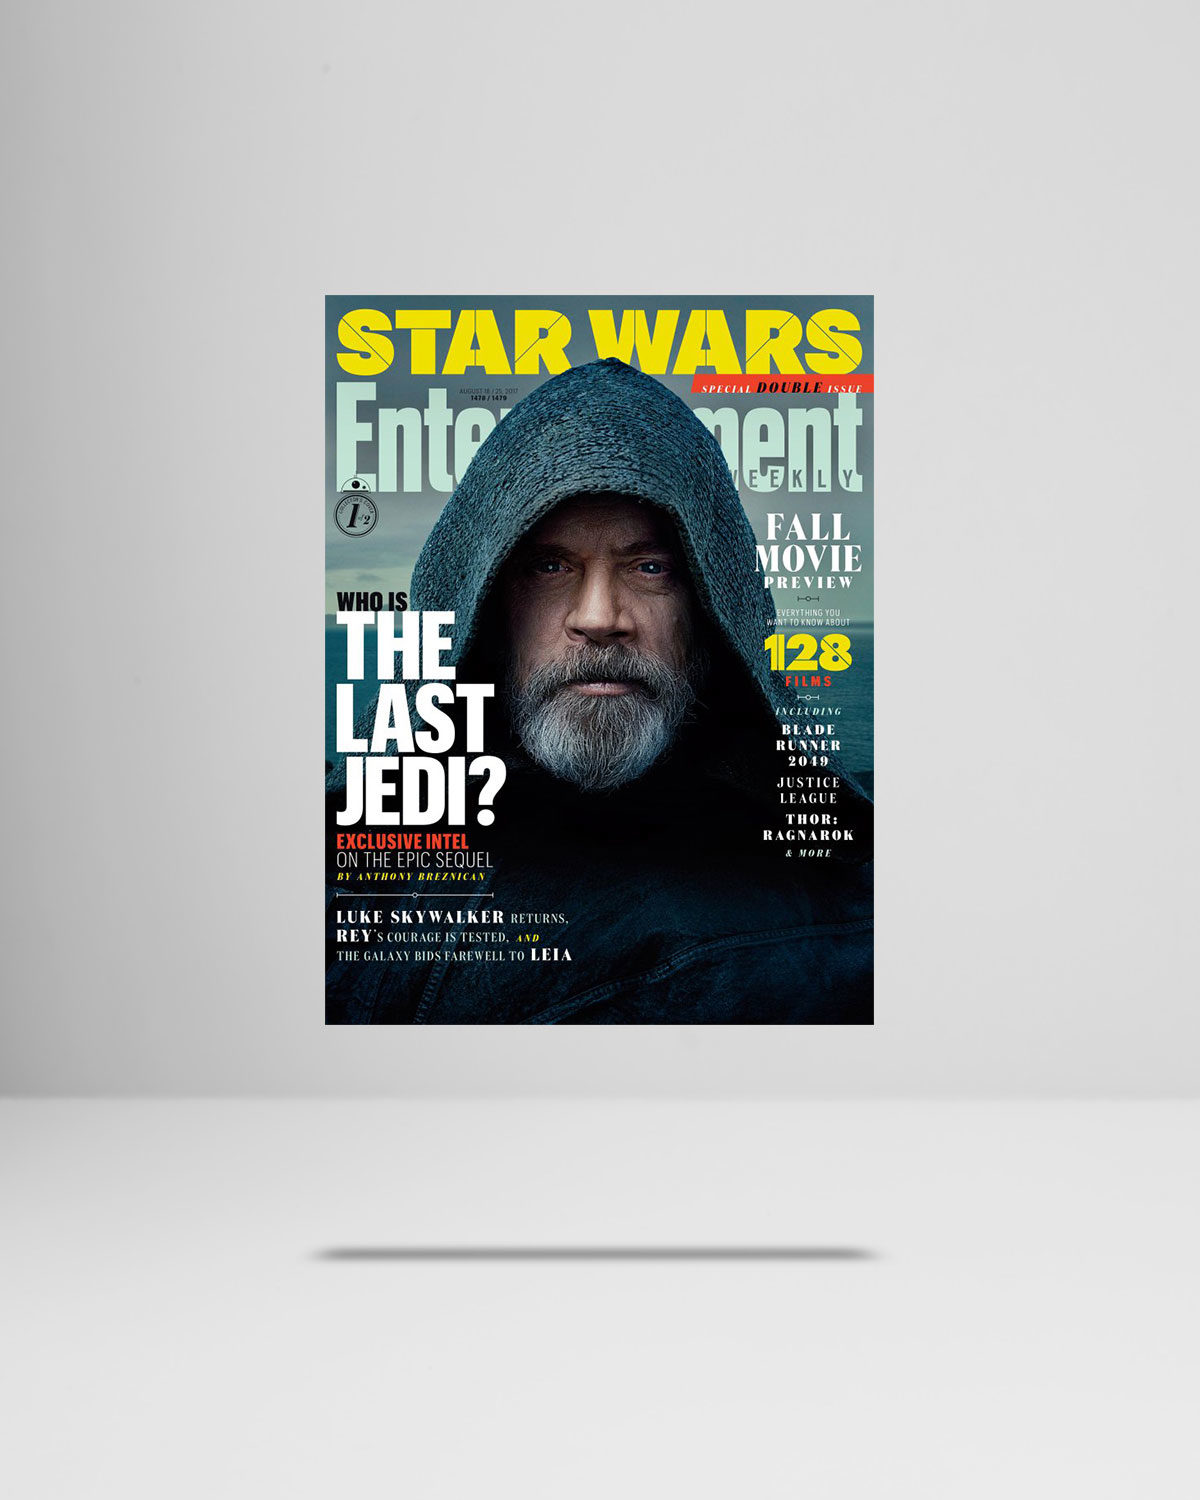 Entertainment Weekly Teases Us With The Last Jedi Images